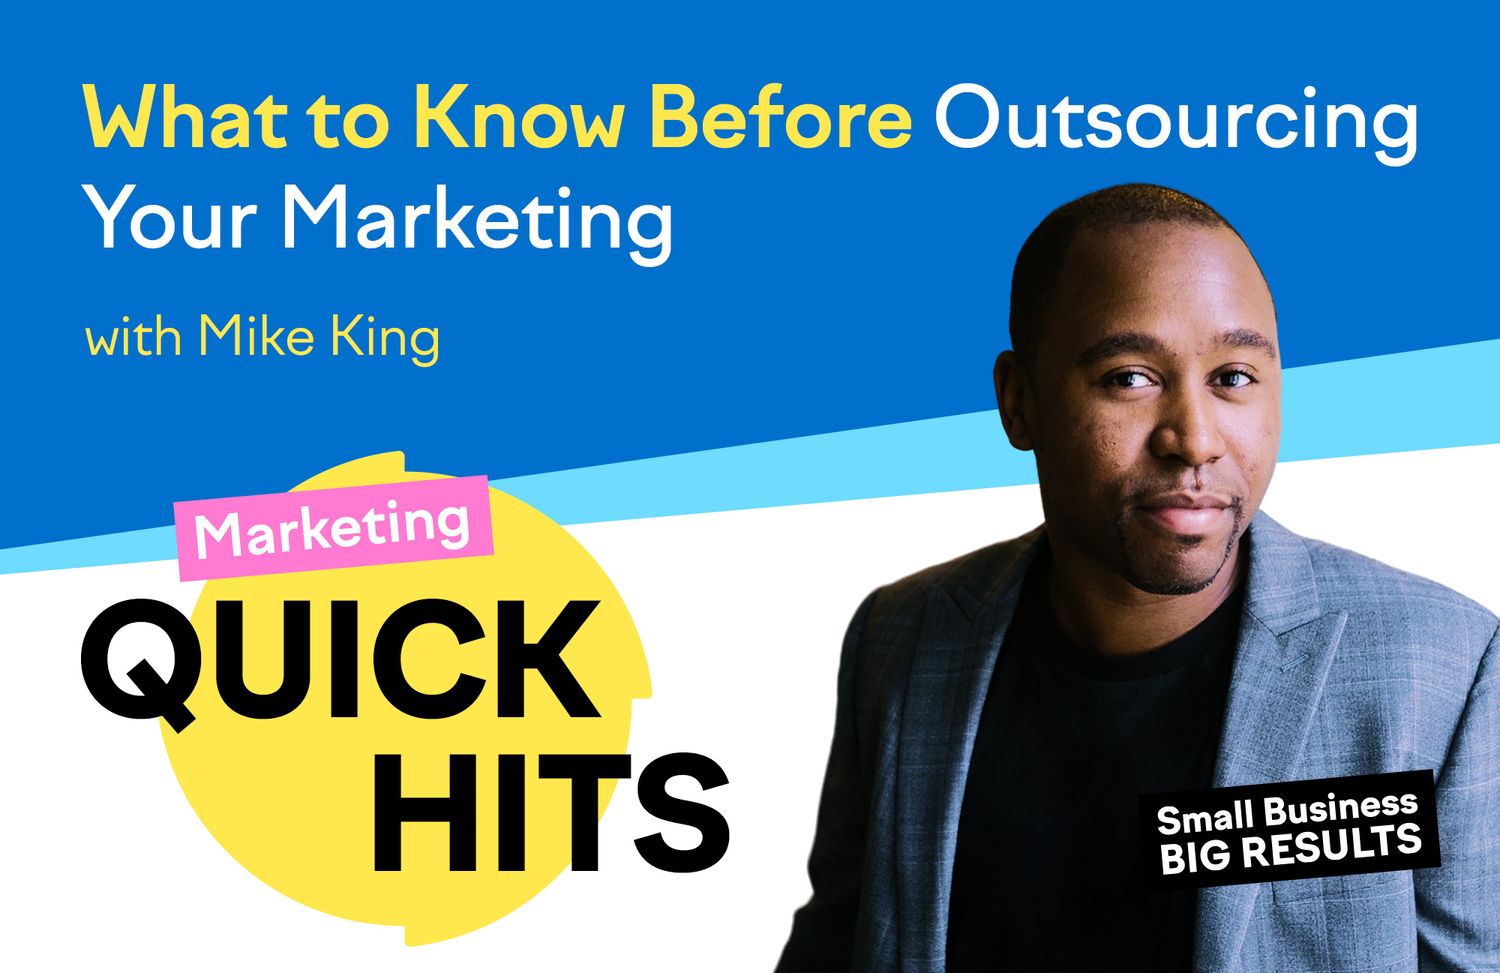 What to Know Before Outsourcing Your Marketing with Mike King